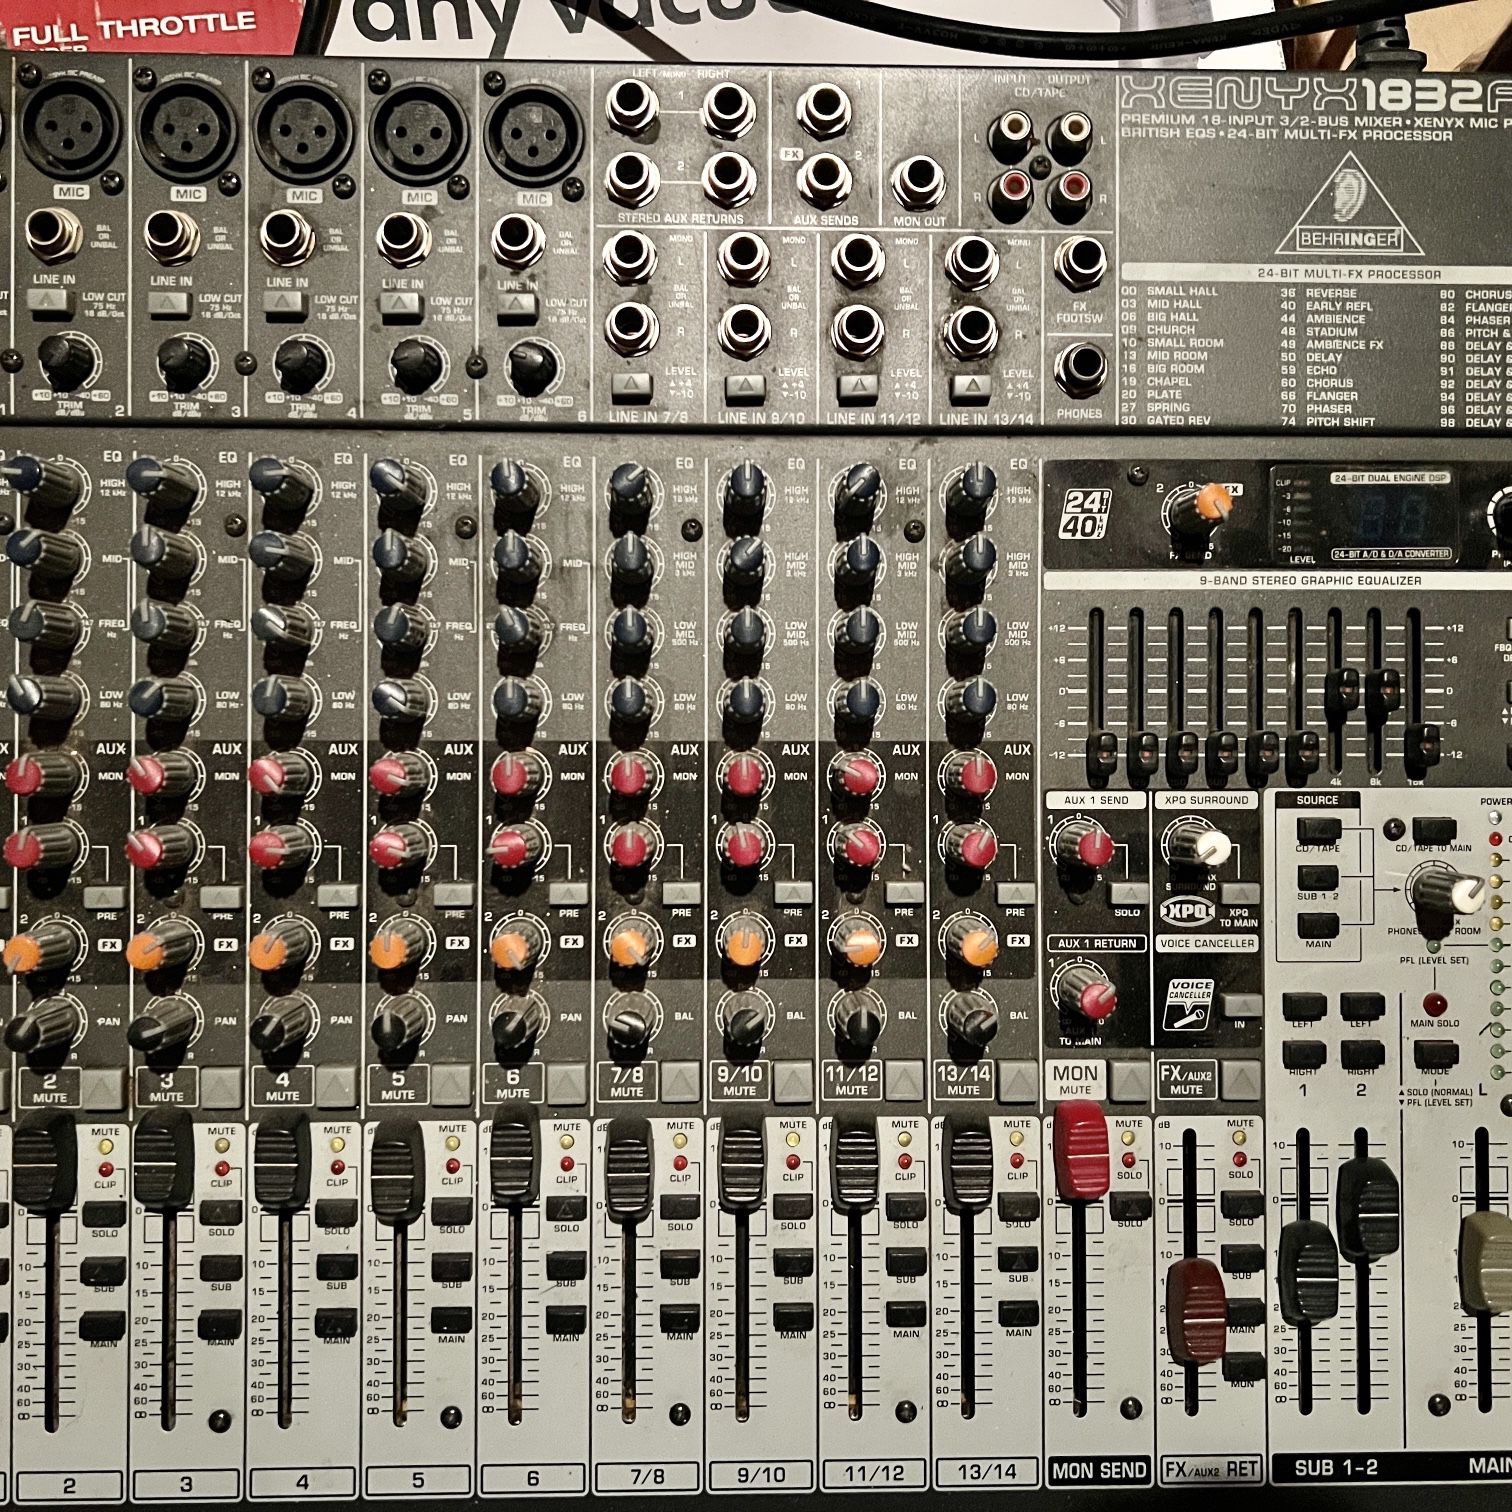 provokere Bred rækkevidde Ithaca Behringer XENYX 1832FX - 18 Channel, 2 Bus Audio Mixer with Effects  Processor for Sale in Staten Island, NY - OfferUp